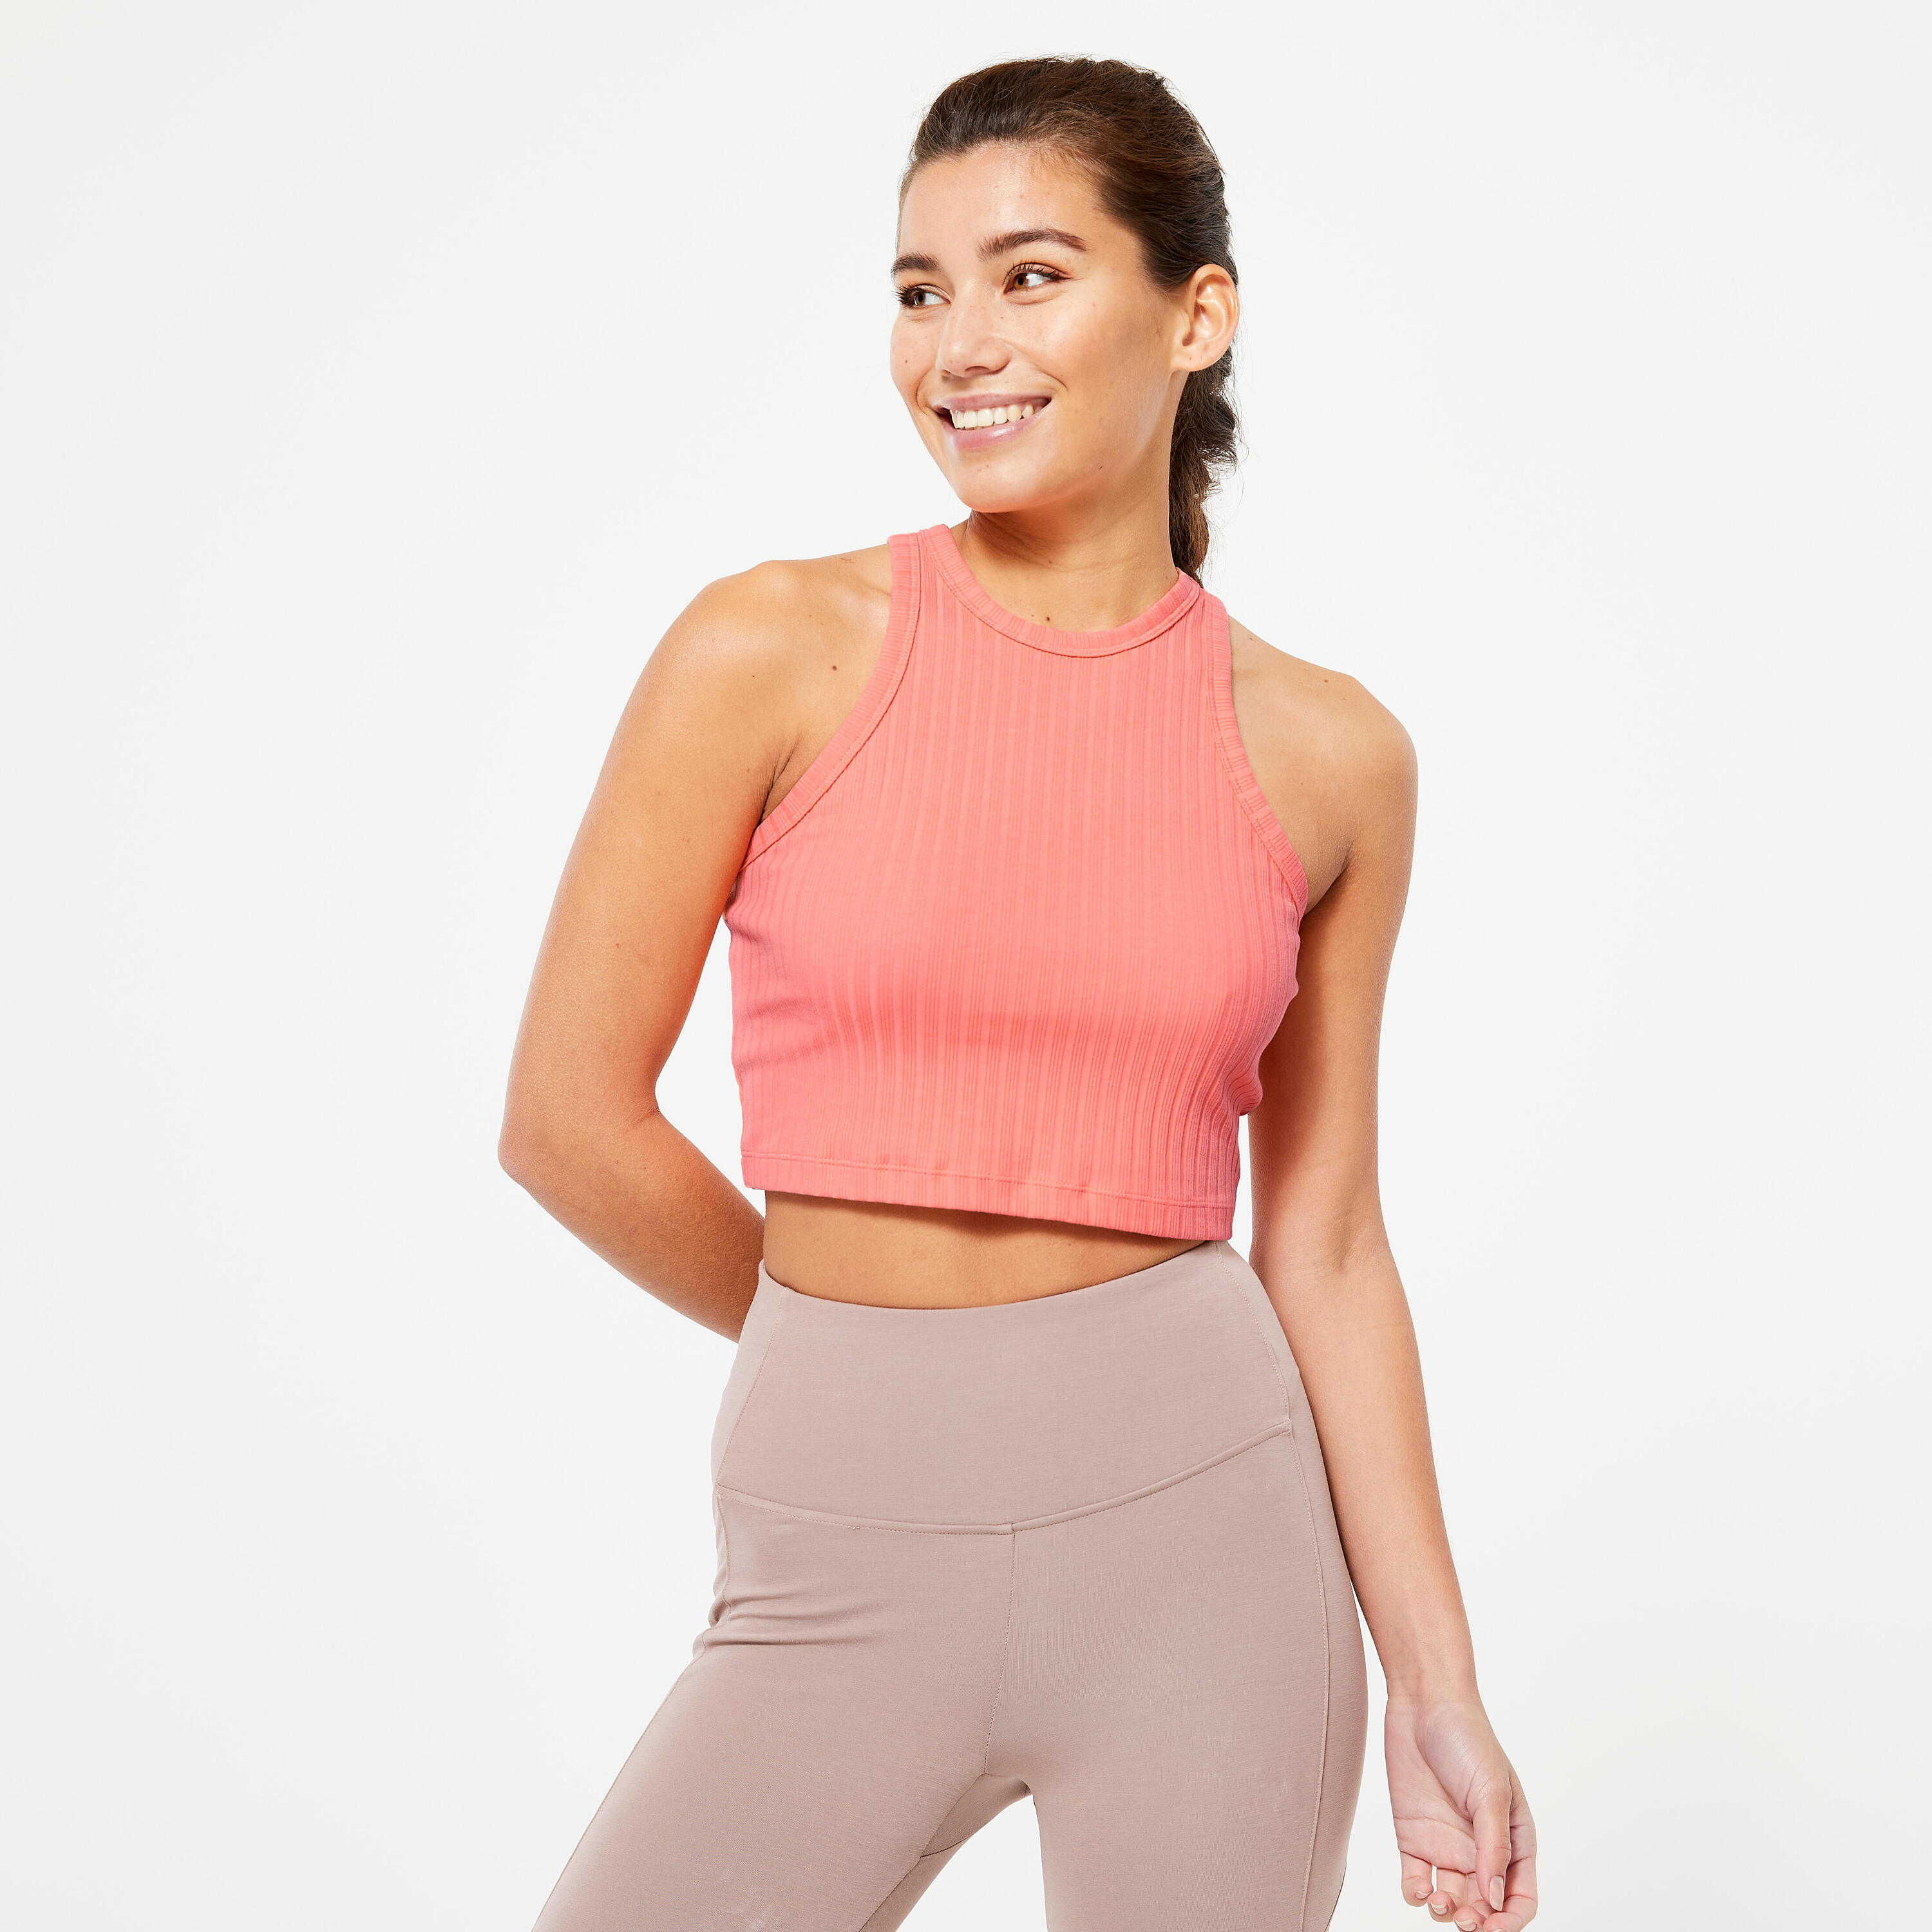 DOMYOS Women's Fitness Ribbed Crop Top 520 - Pastel Coral